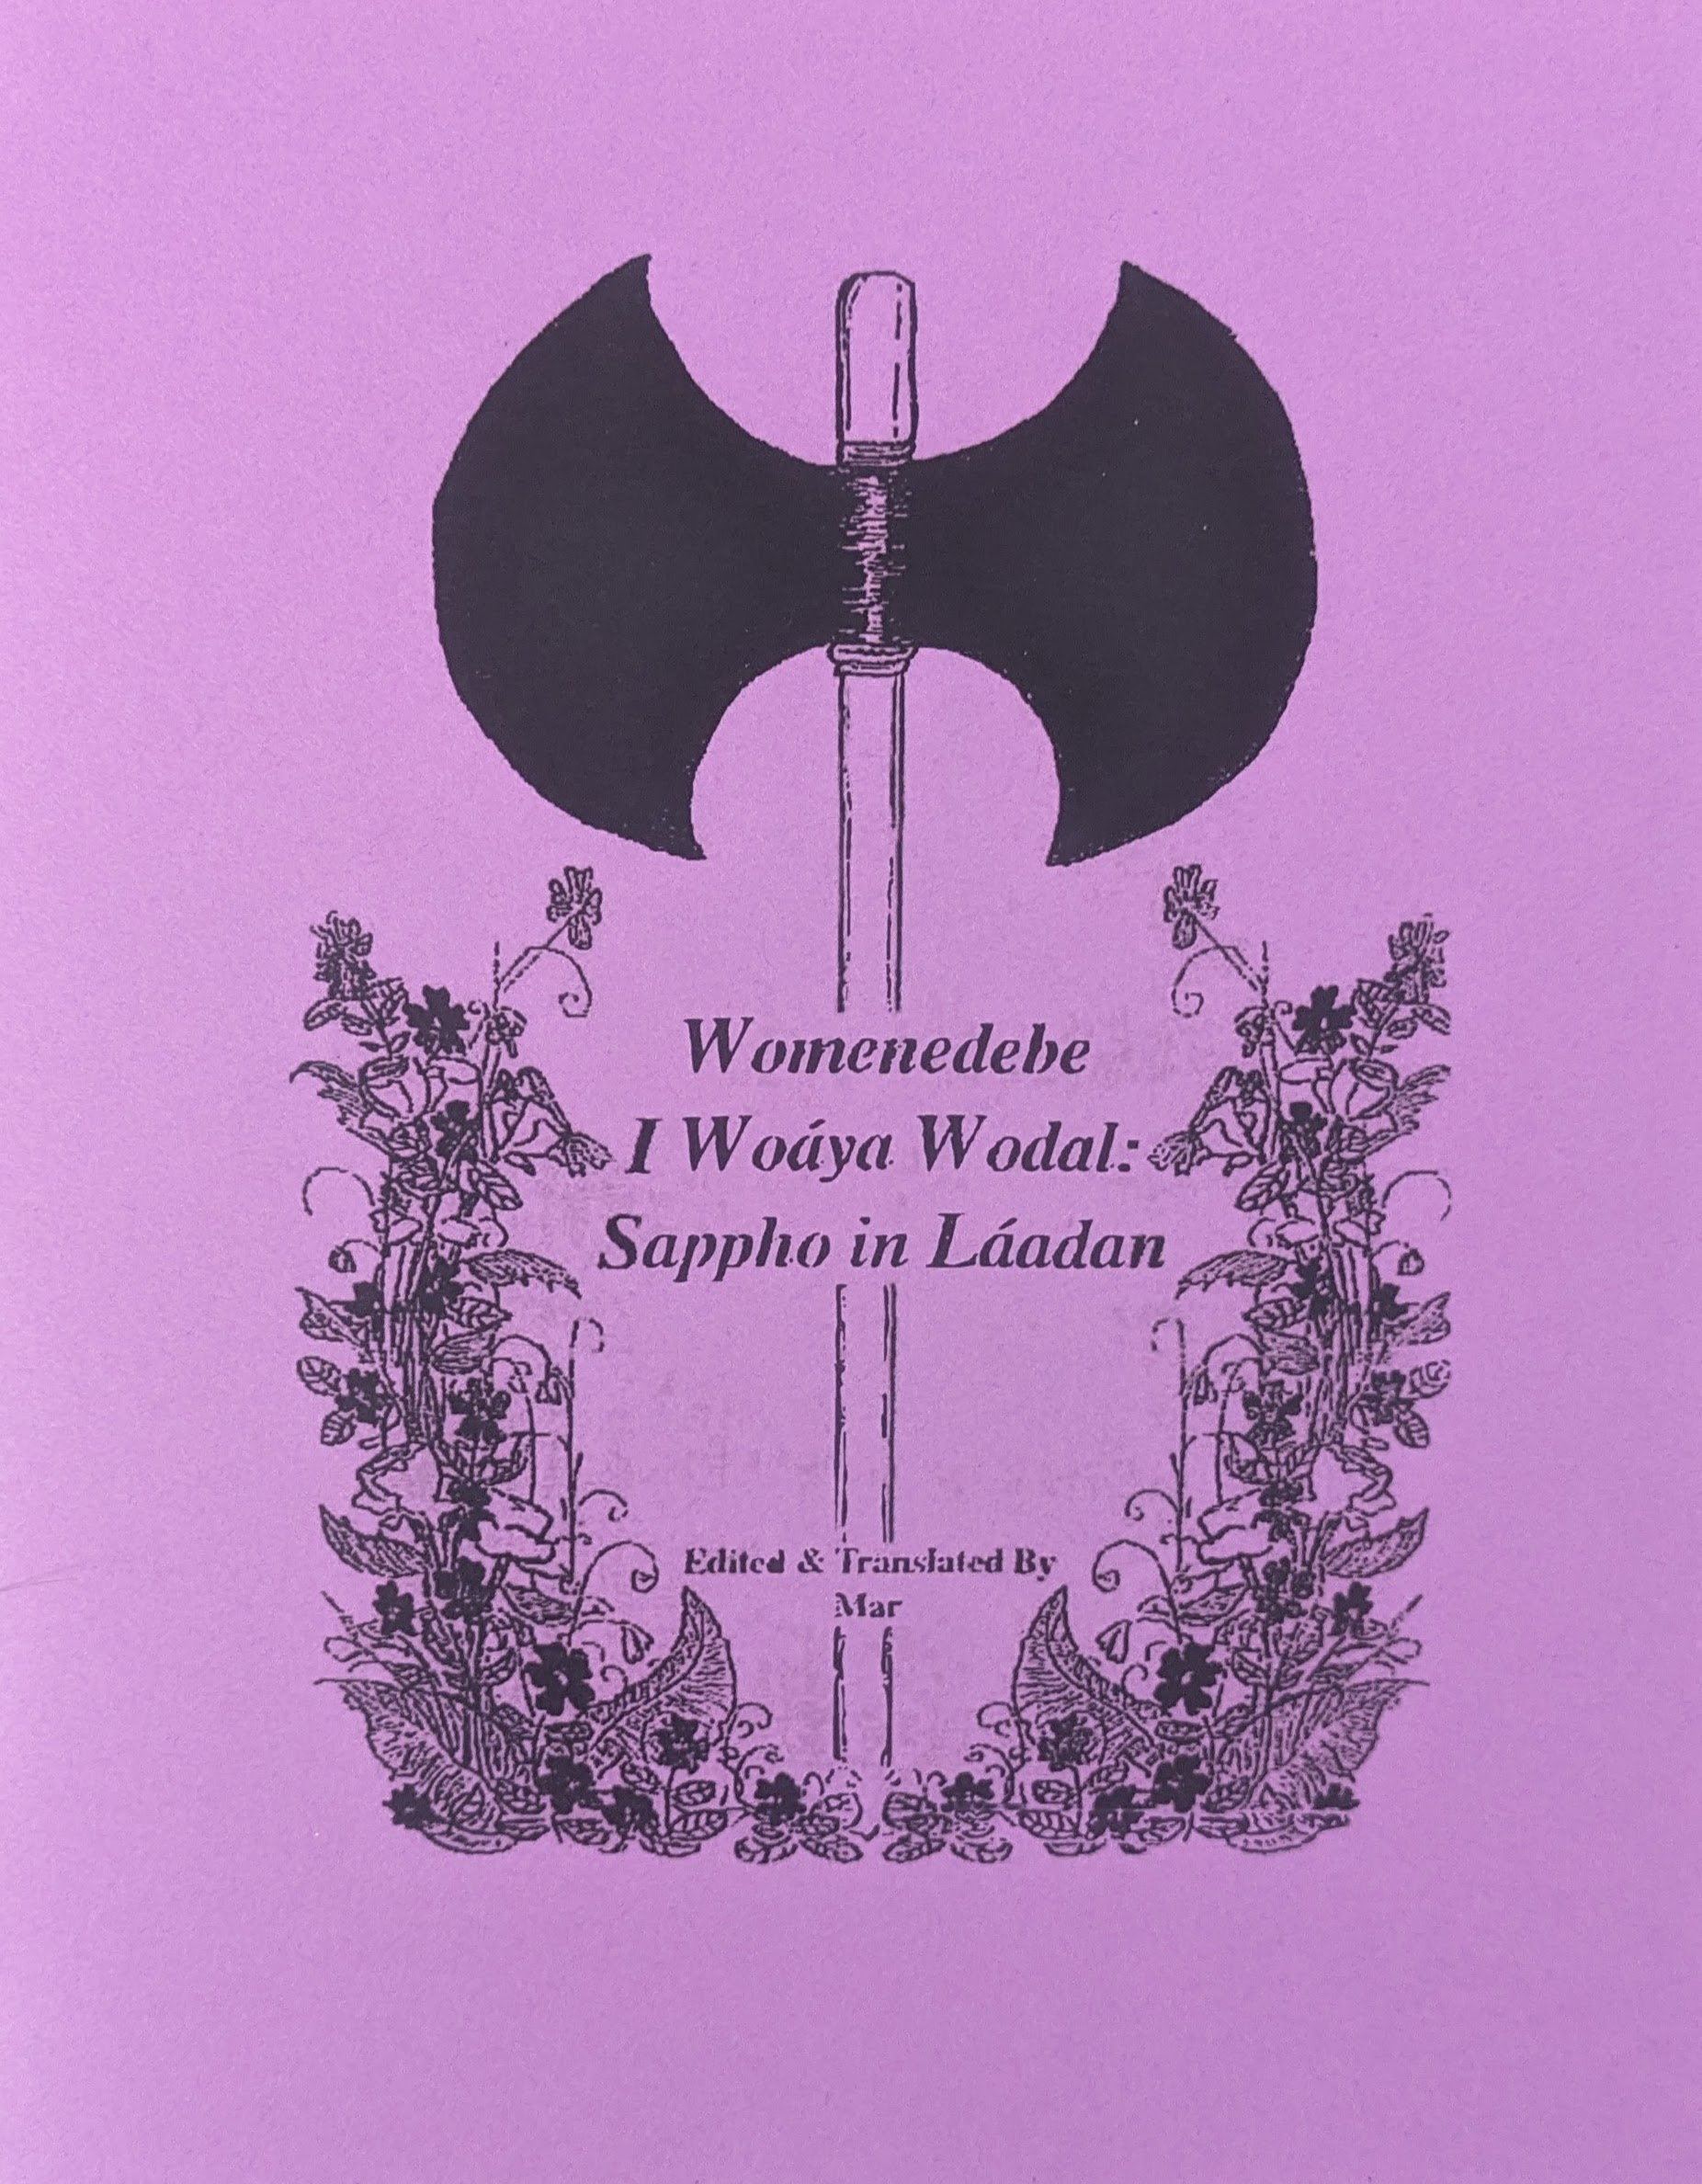 The cover of the zine “Sappho in Laadan.” An illustration of the labrys lesbian flag surrounded by flowers.